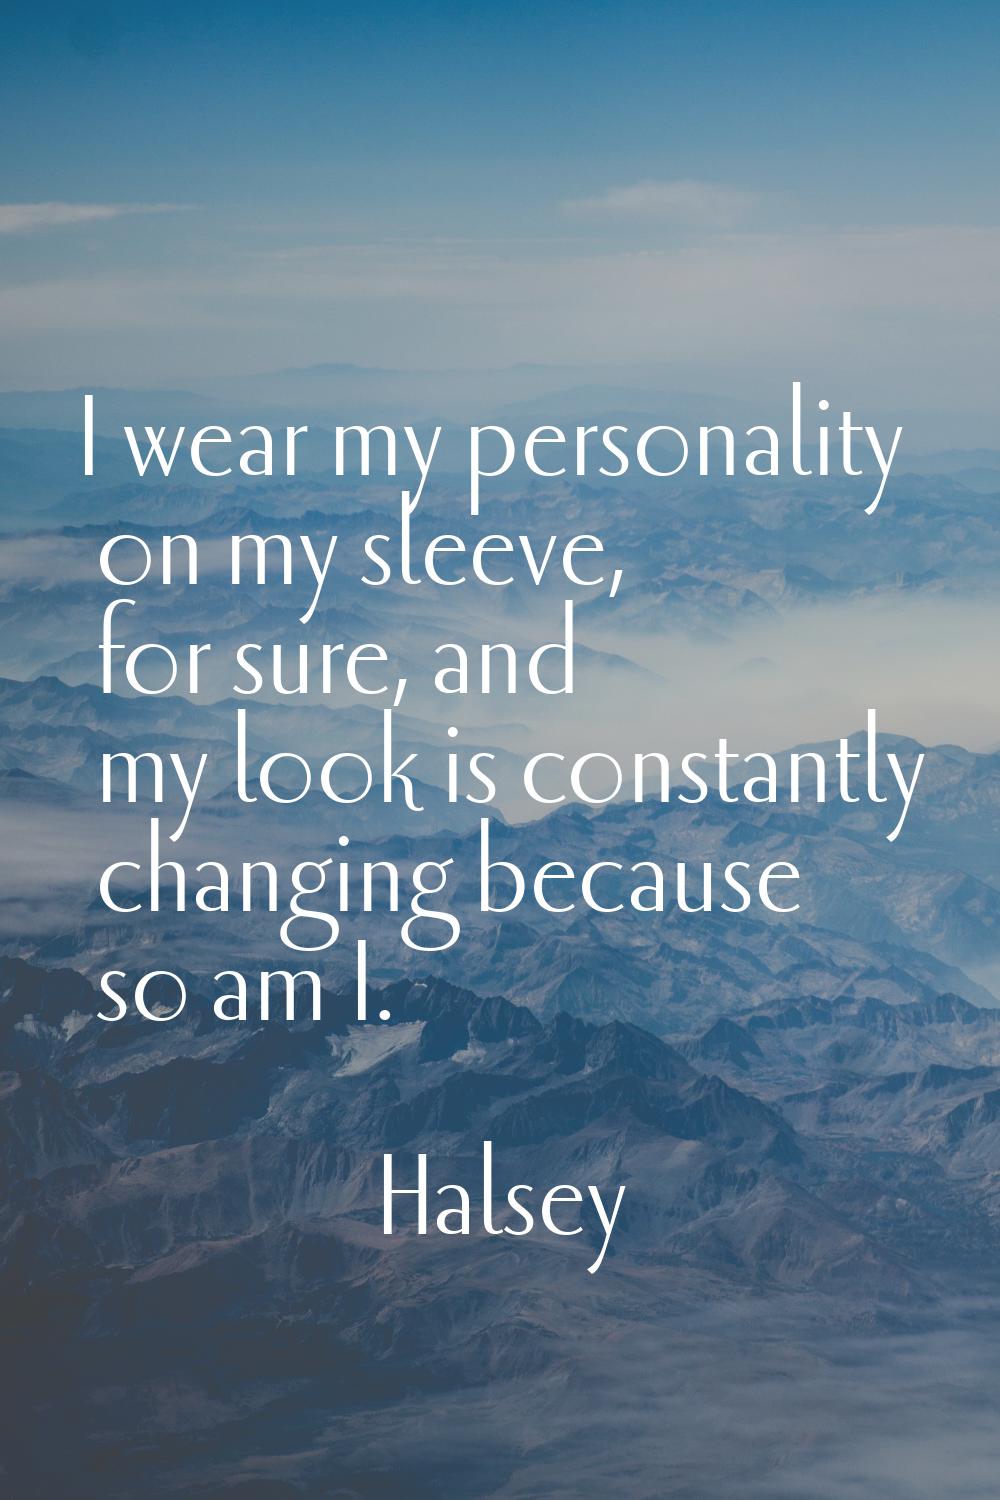 I wear my personality on my sleeve, for sure, and my look is constantly changing because so am I.